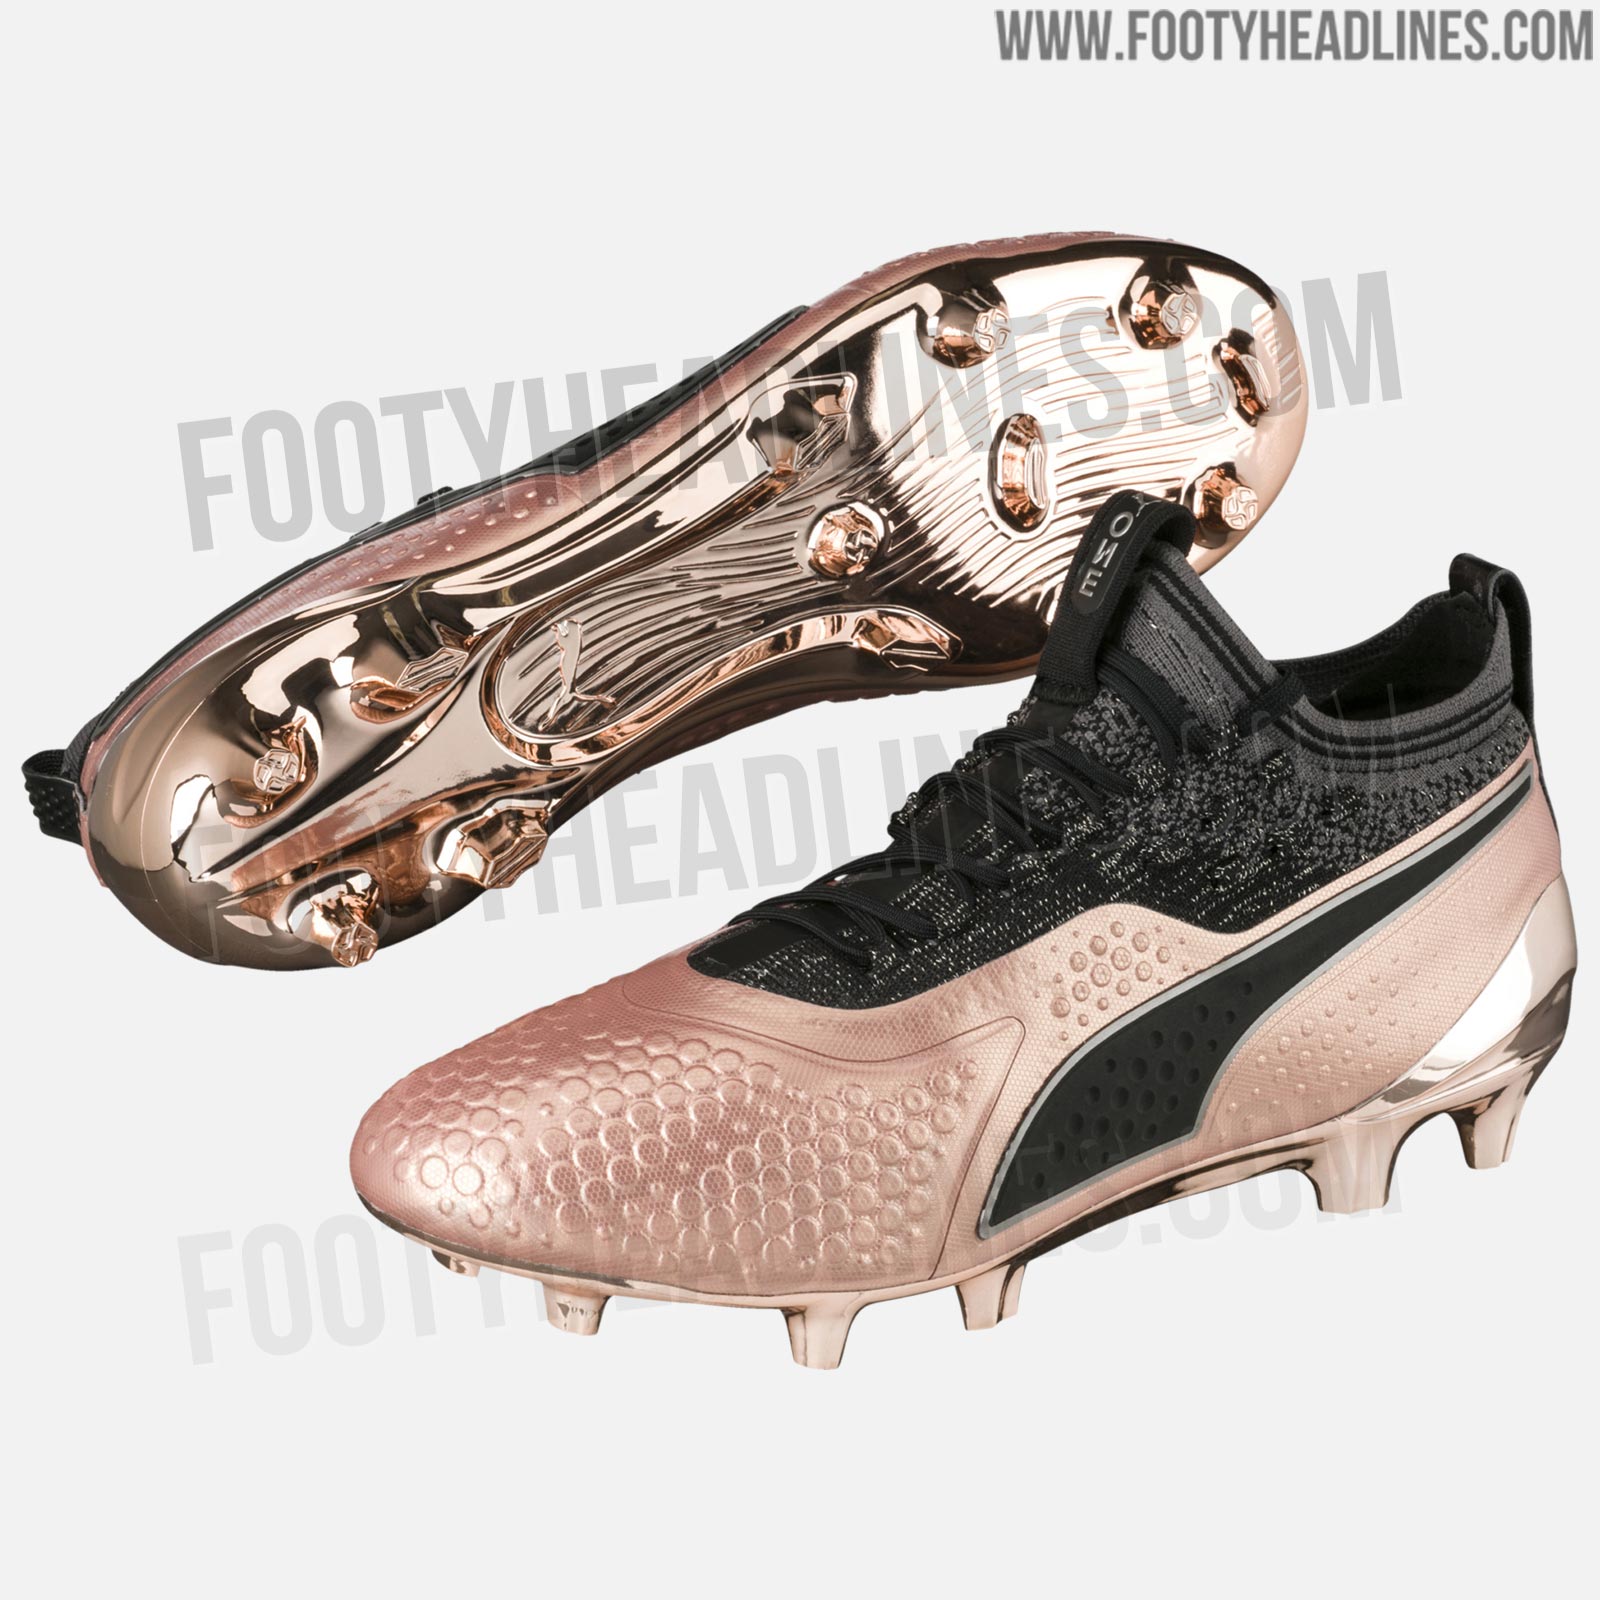 Rose Gold Puma One 'Road to Glory Pack' Boots Revealed - Footy Headlines